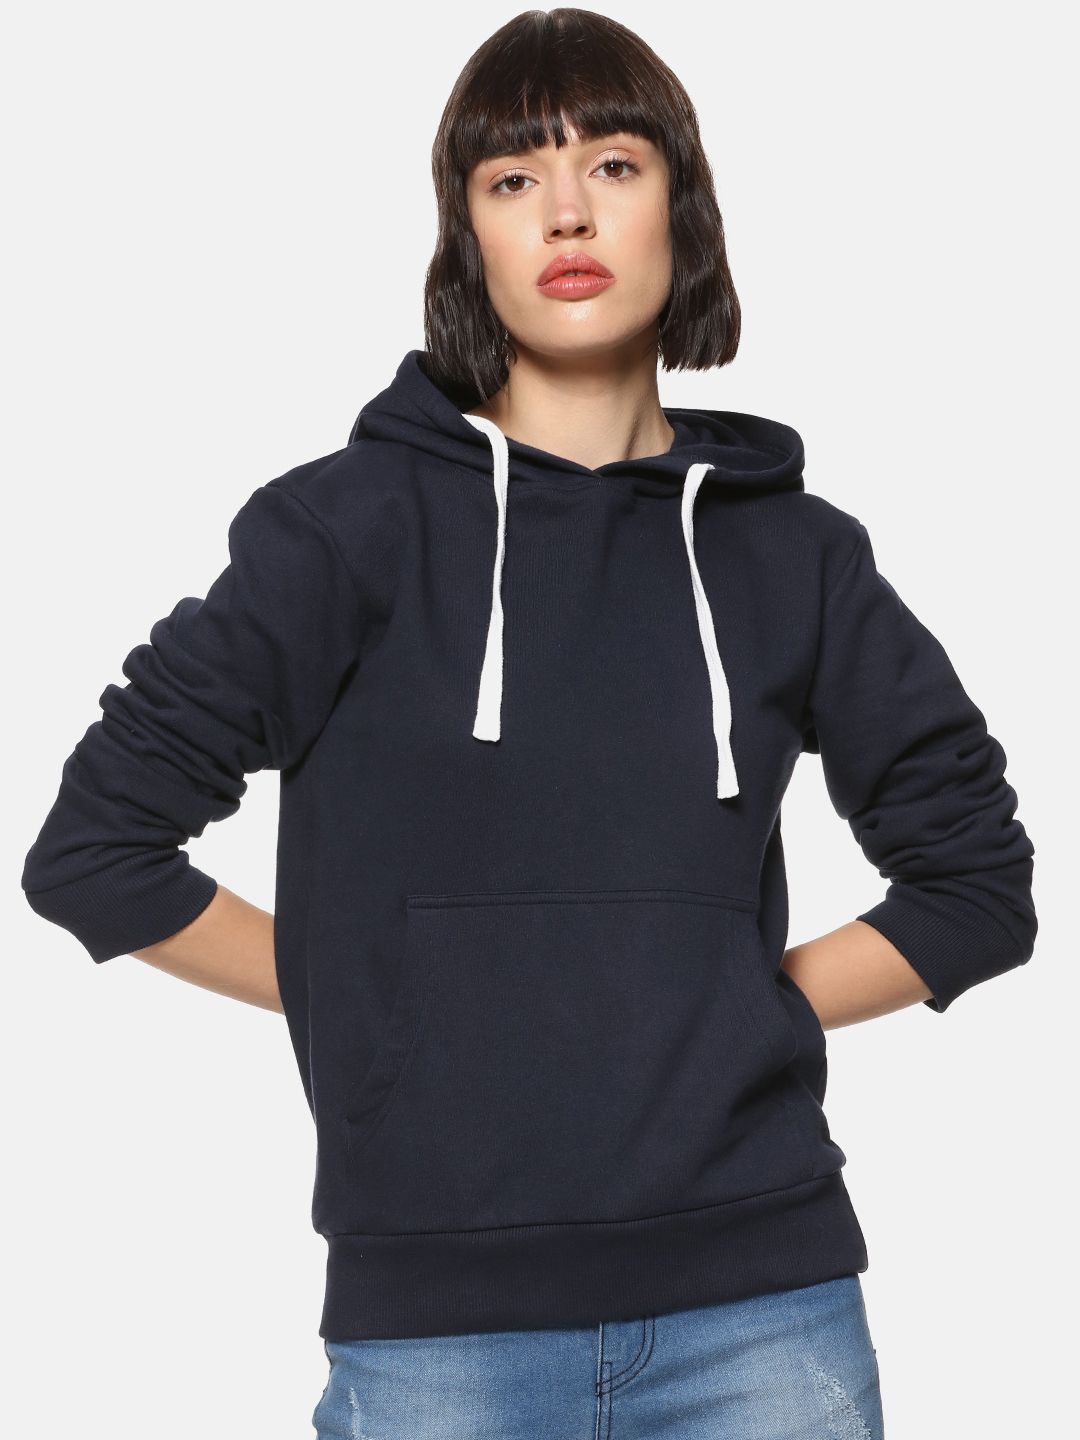 Campus Sutra Women Blue Solid Hooded Sweatshirt Price in India